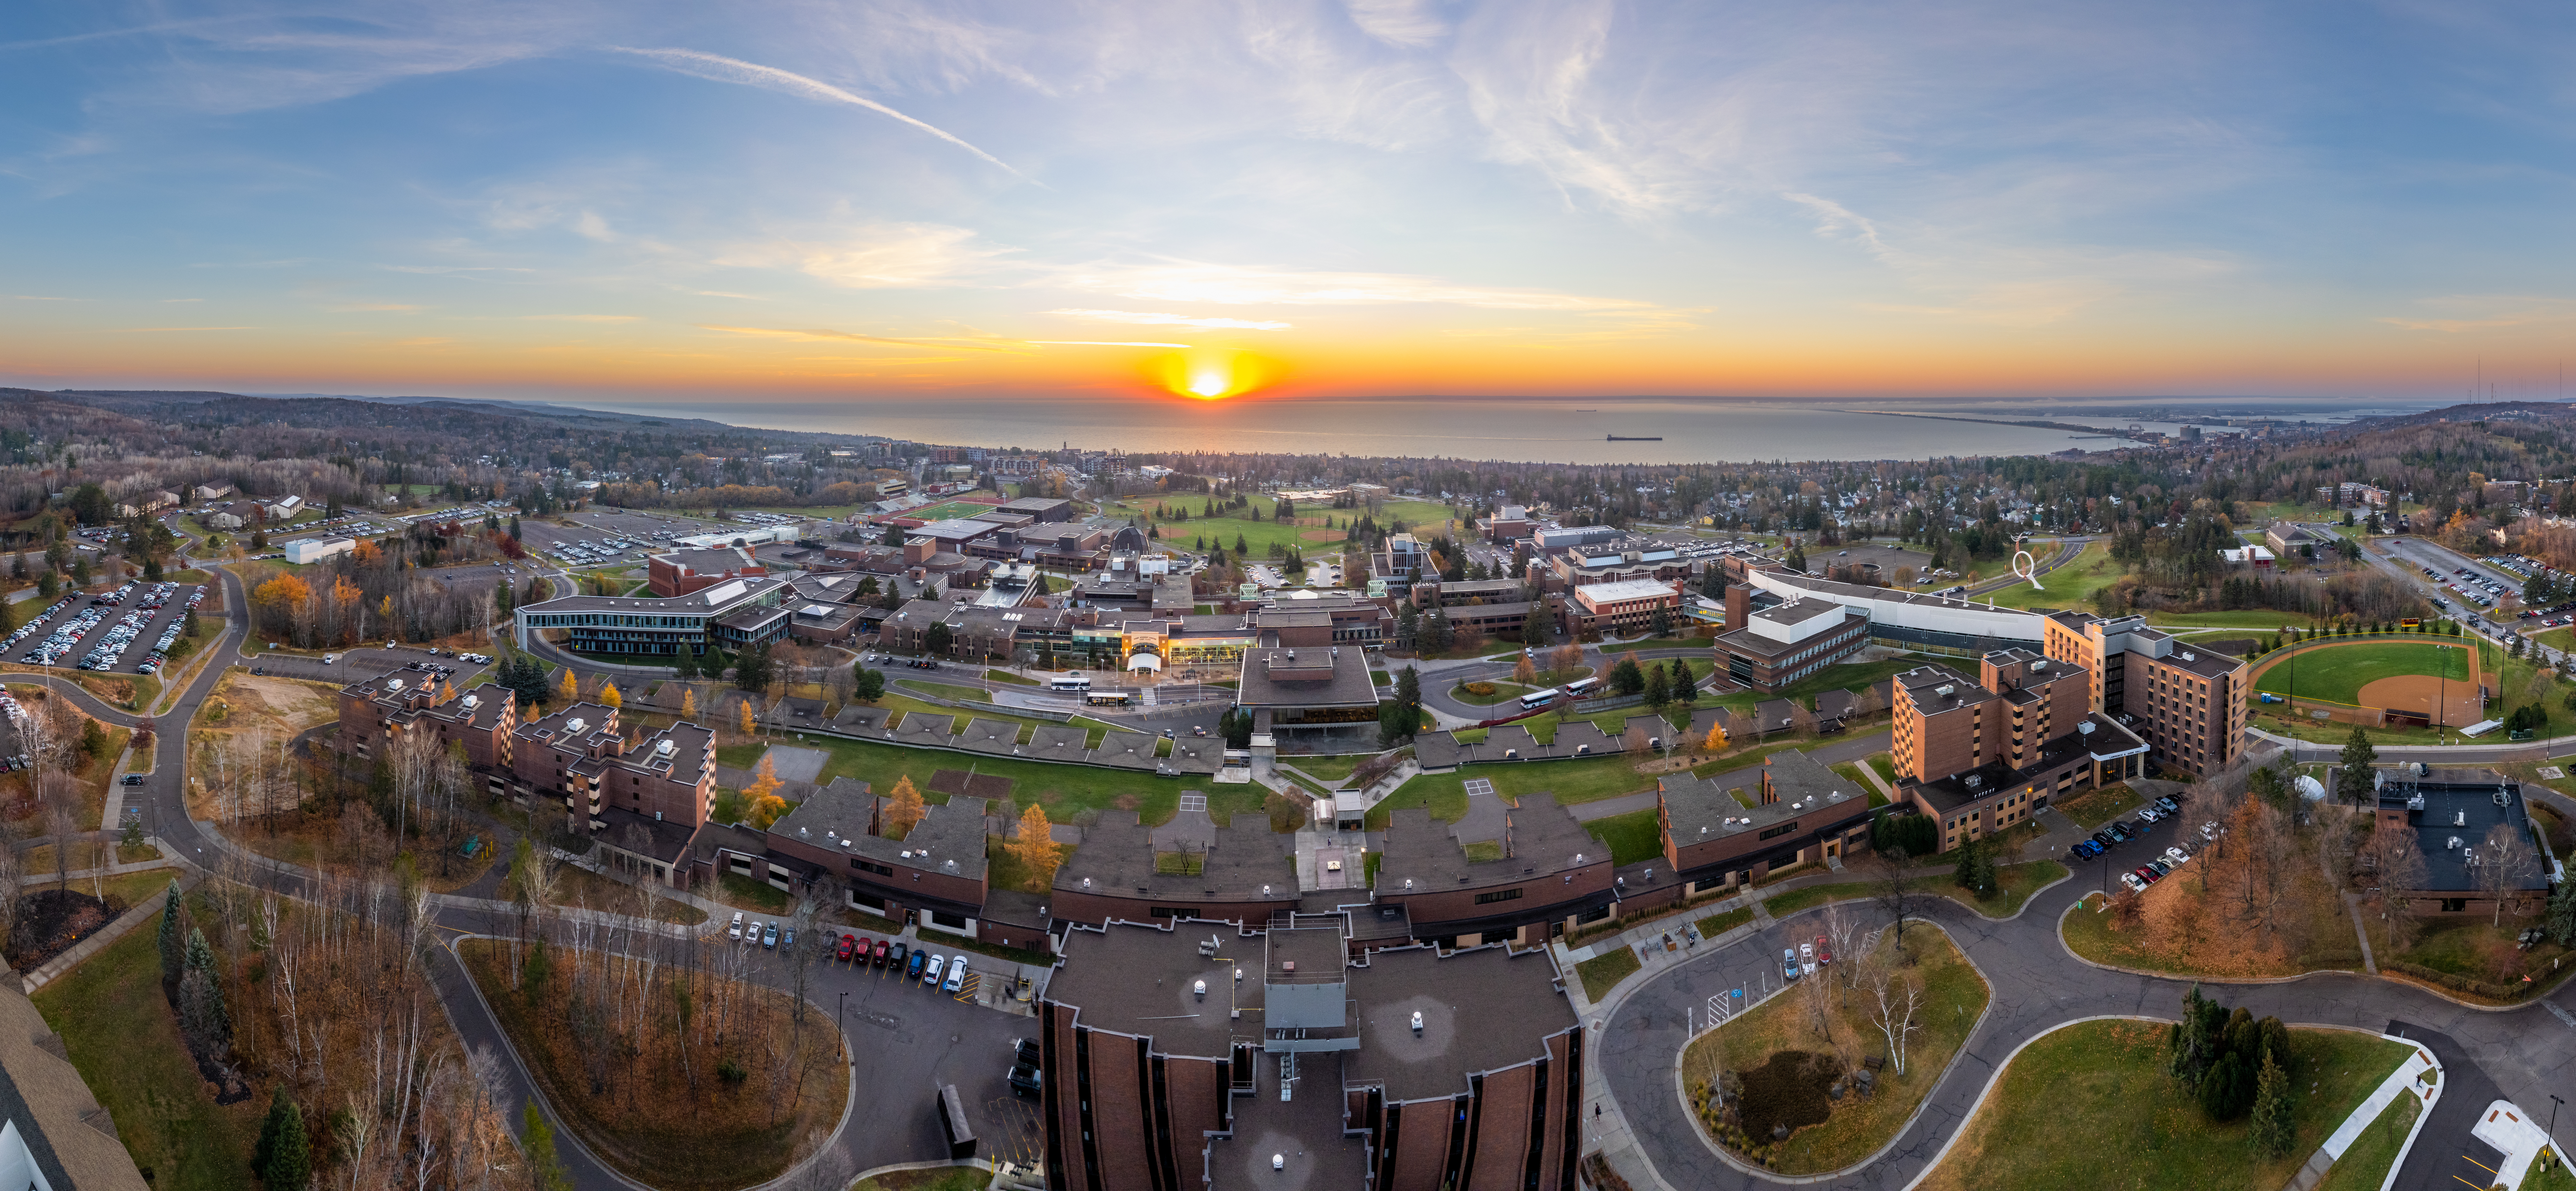 Aerial image of UMD Duluth's residence hall concourse system from the exterior view with a sunrise centered in the background